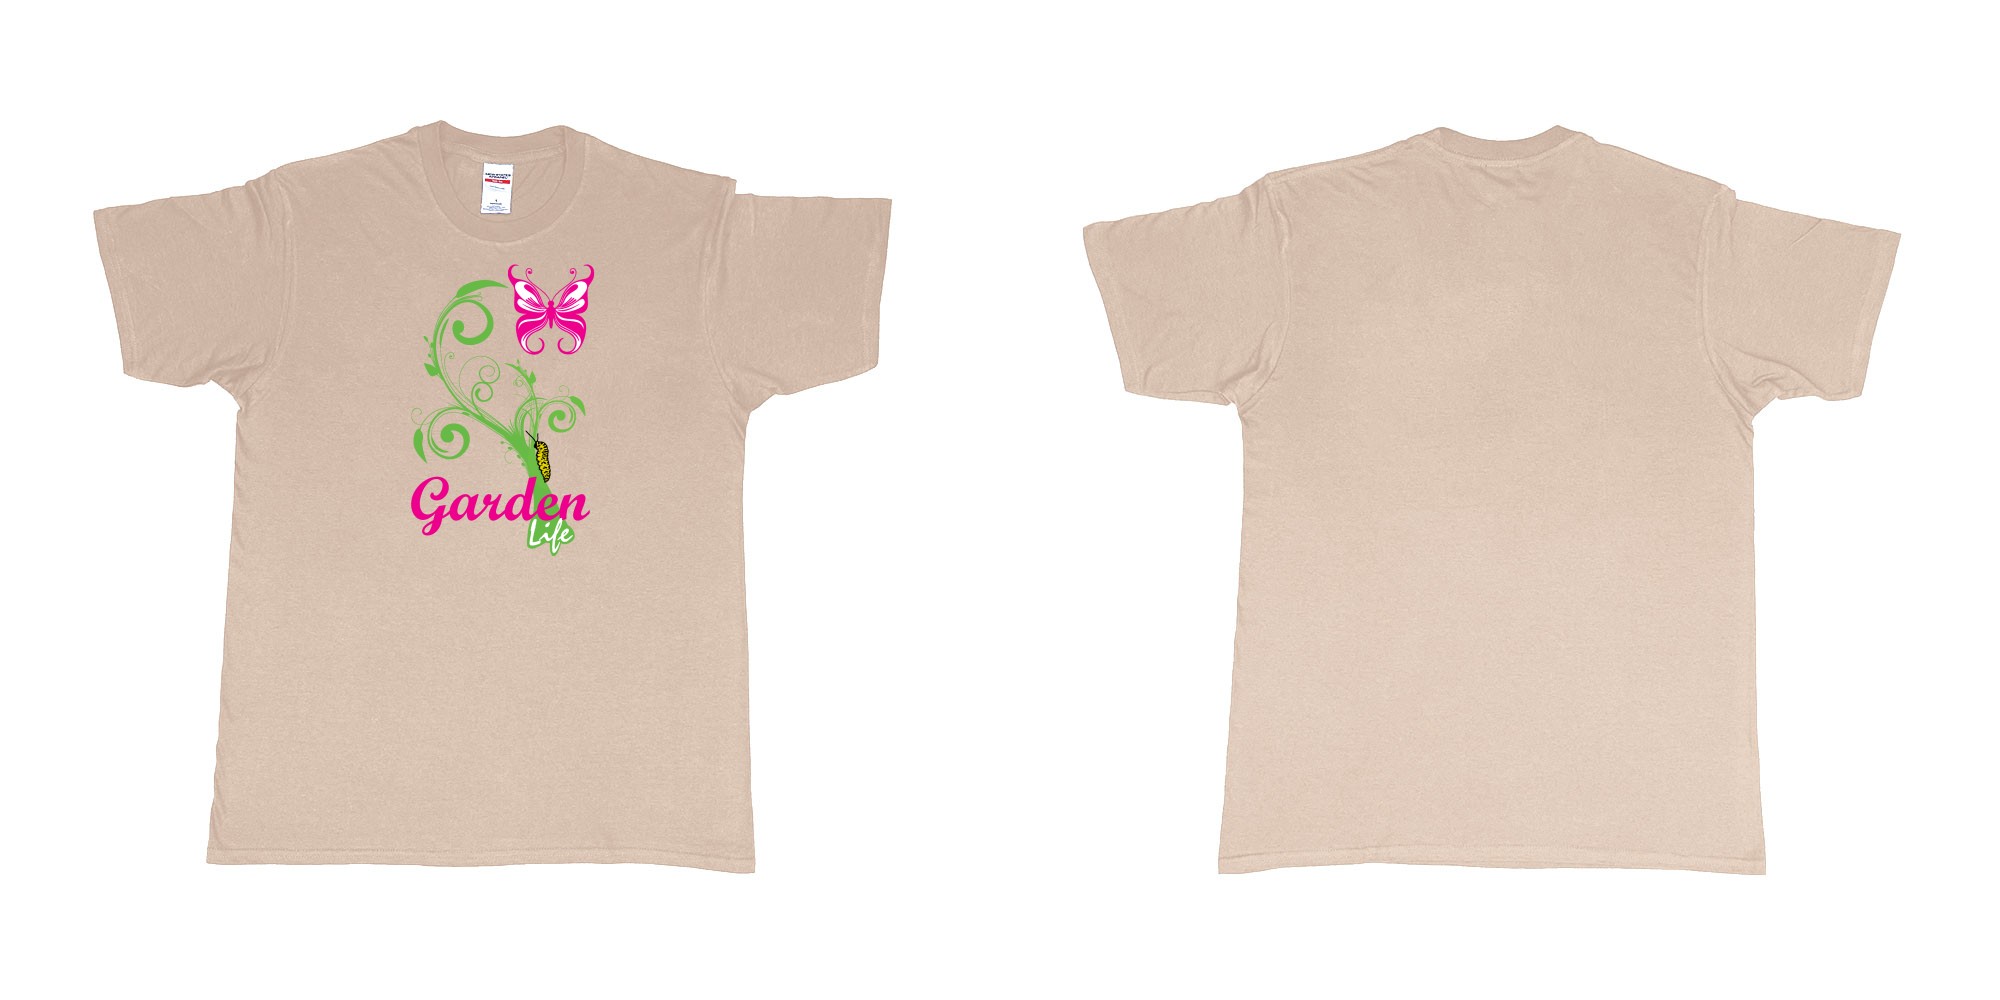 Custom tshirt design garden life transformation from a caterpillar and a butterfly in fabric color sand choice your own text made in Bali by The Pirate Way